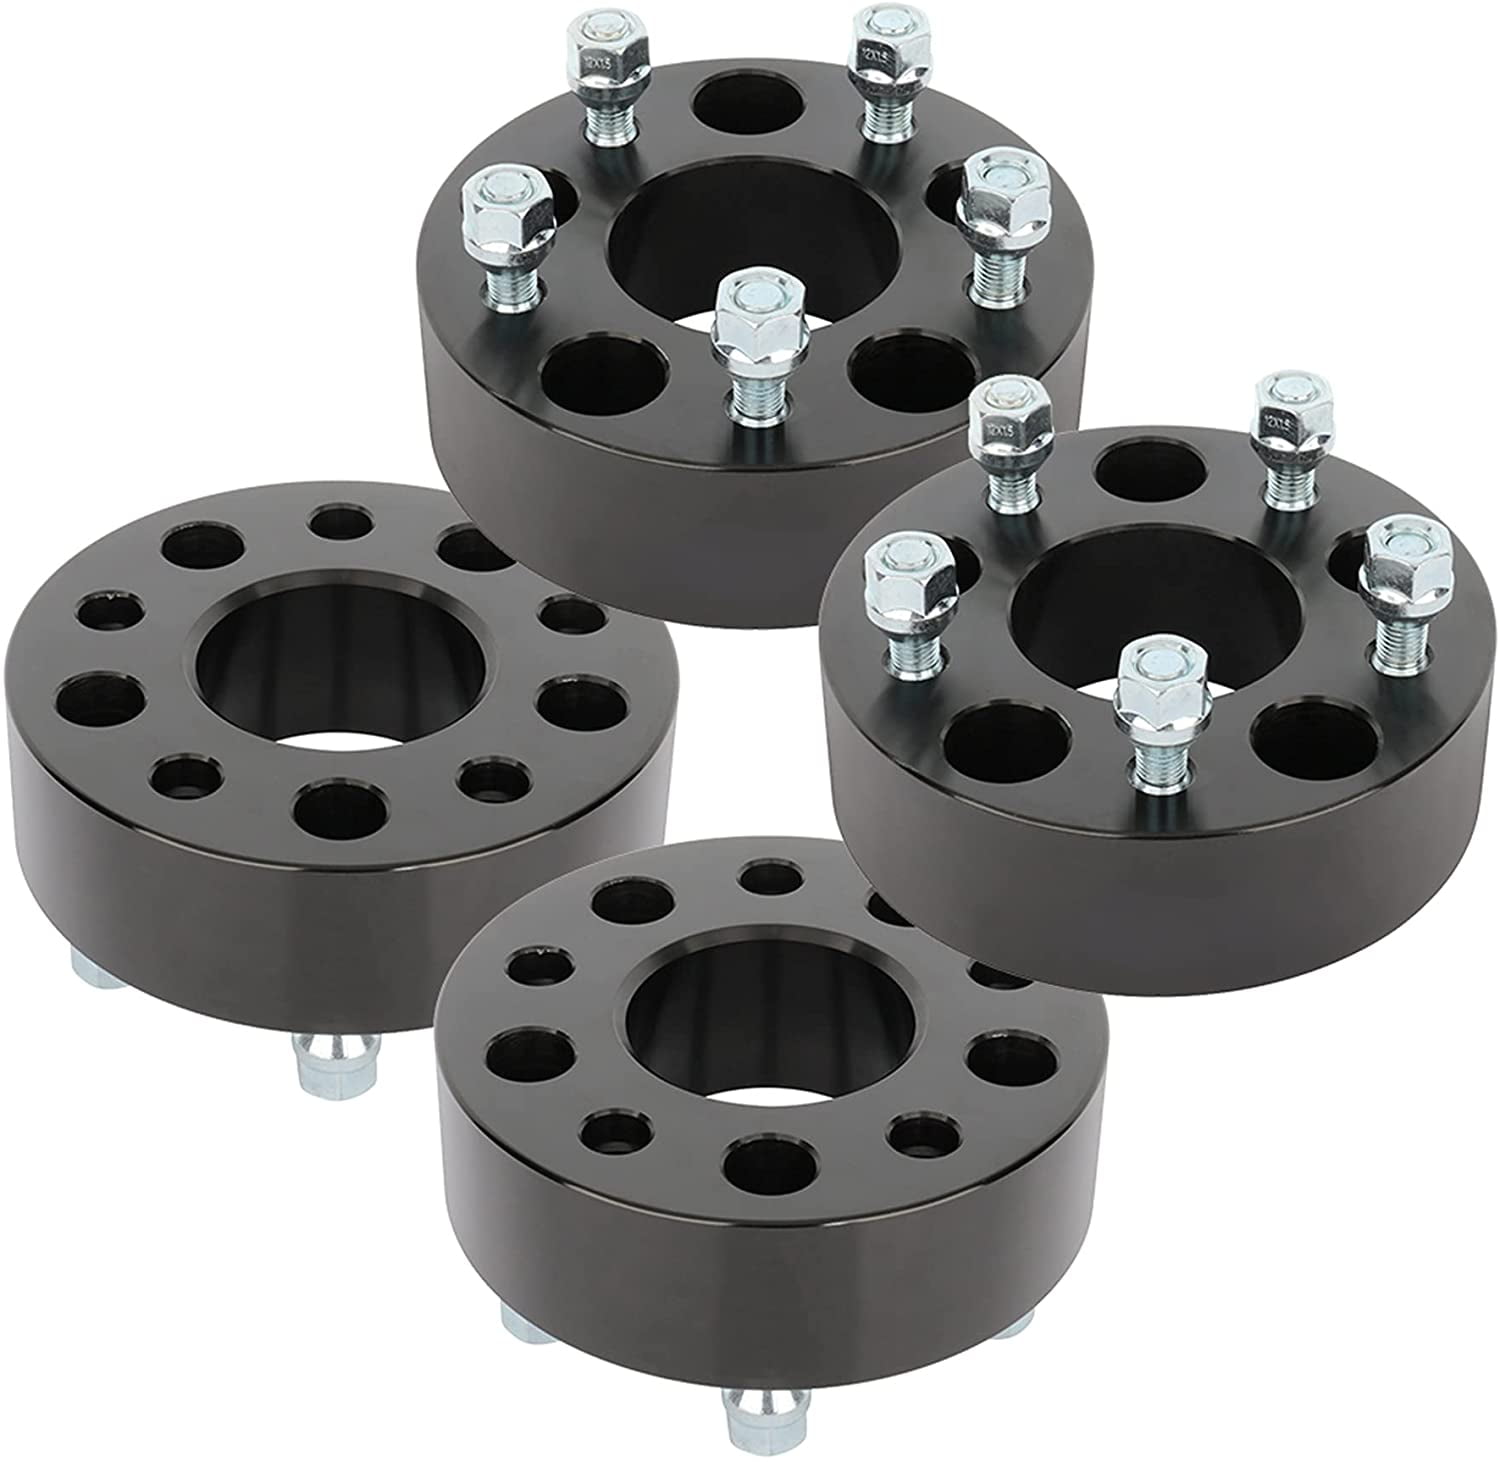 cciyu 4Pc 2.0 5x4.75 to 5x4.75 Hubcentric Wheel Spacers 5 Lug Bolt On 12X1.5 Studs fit for 1990-2001 Chevrolet Corvette GMC Sonoma Jimmy 